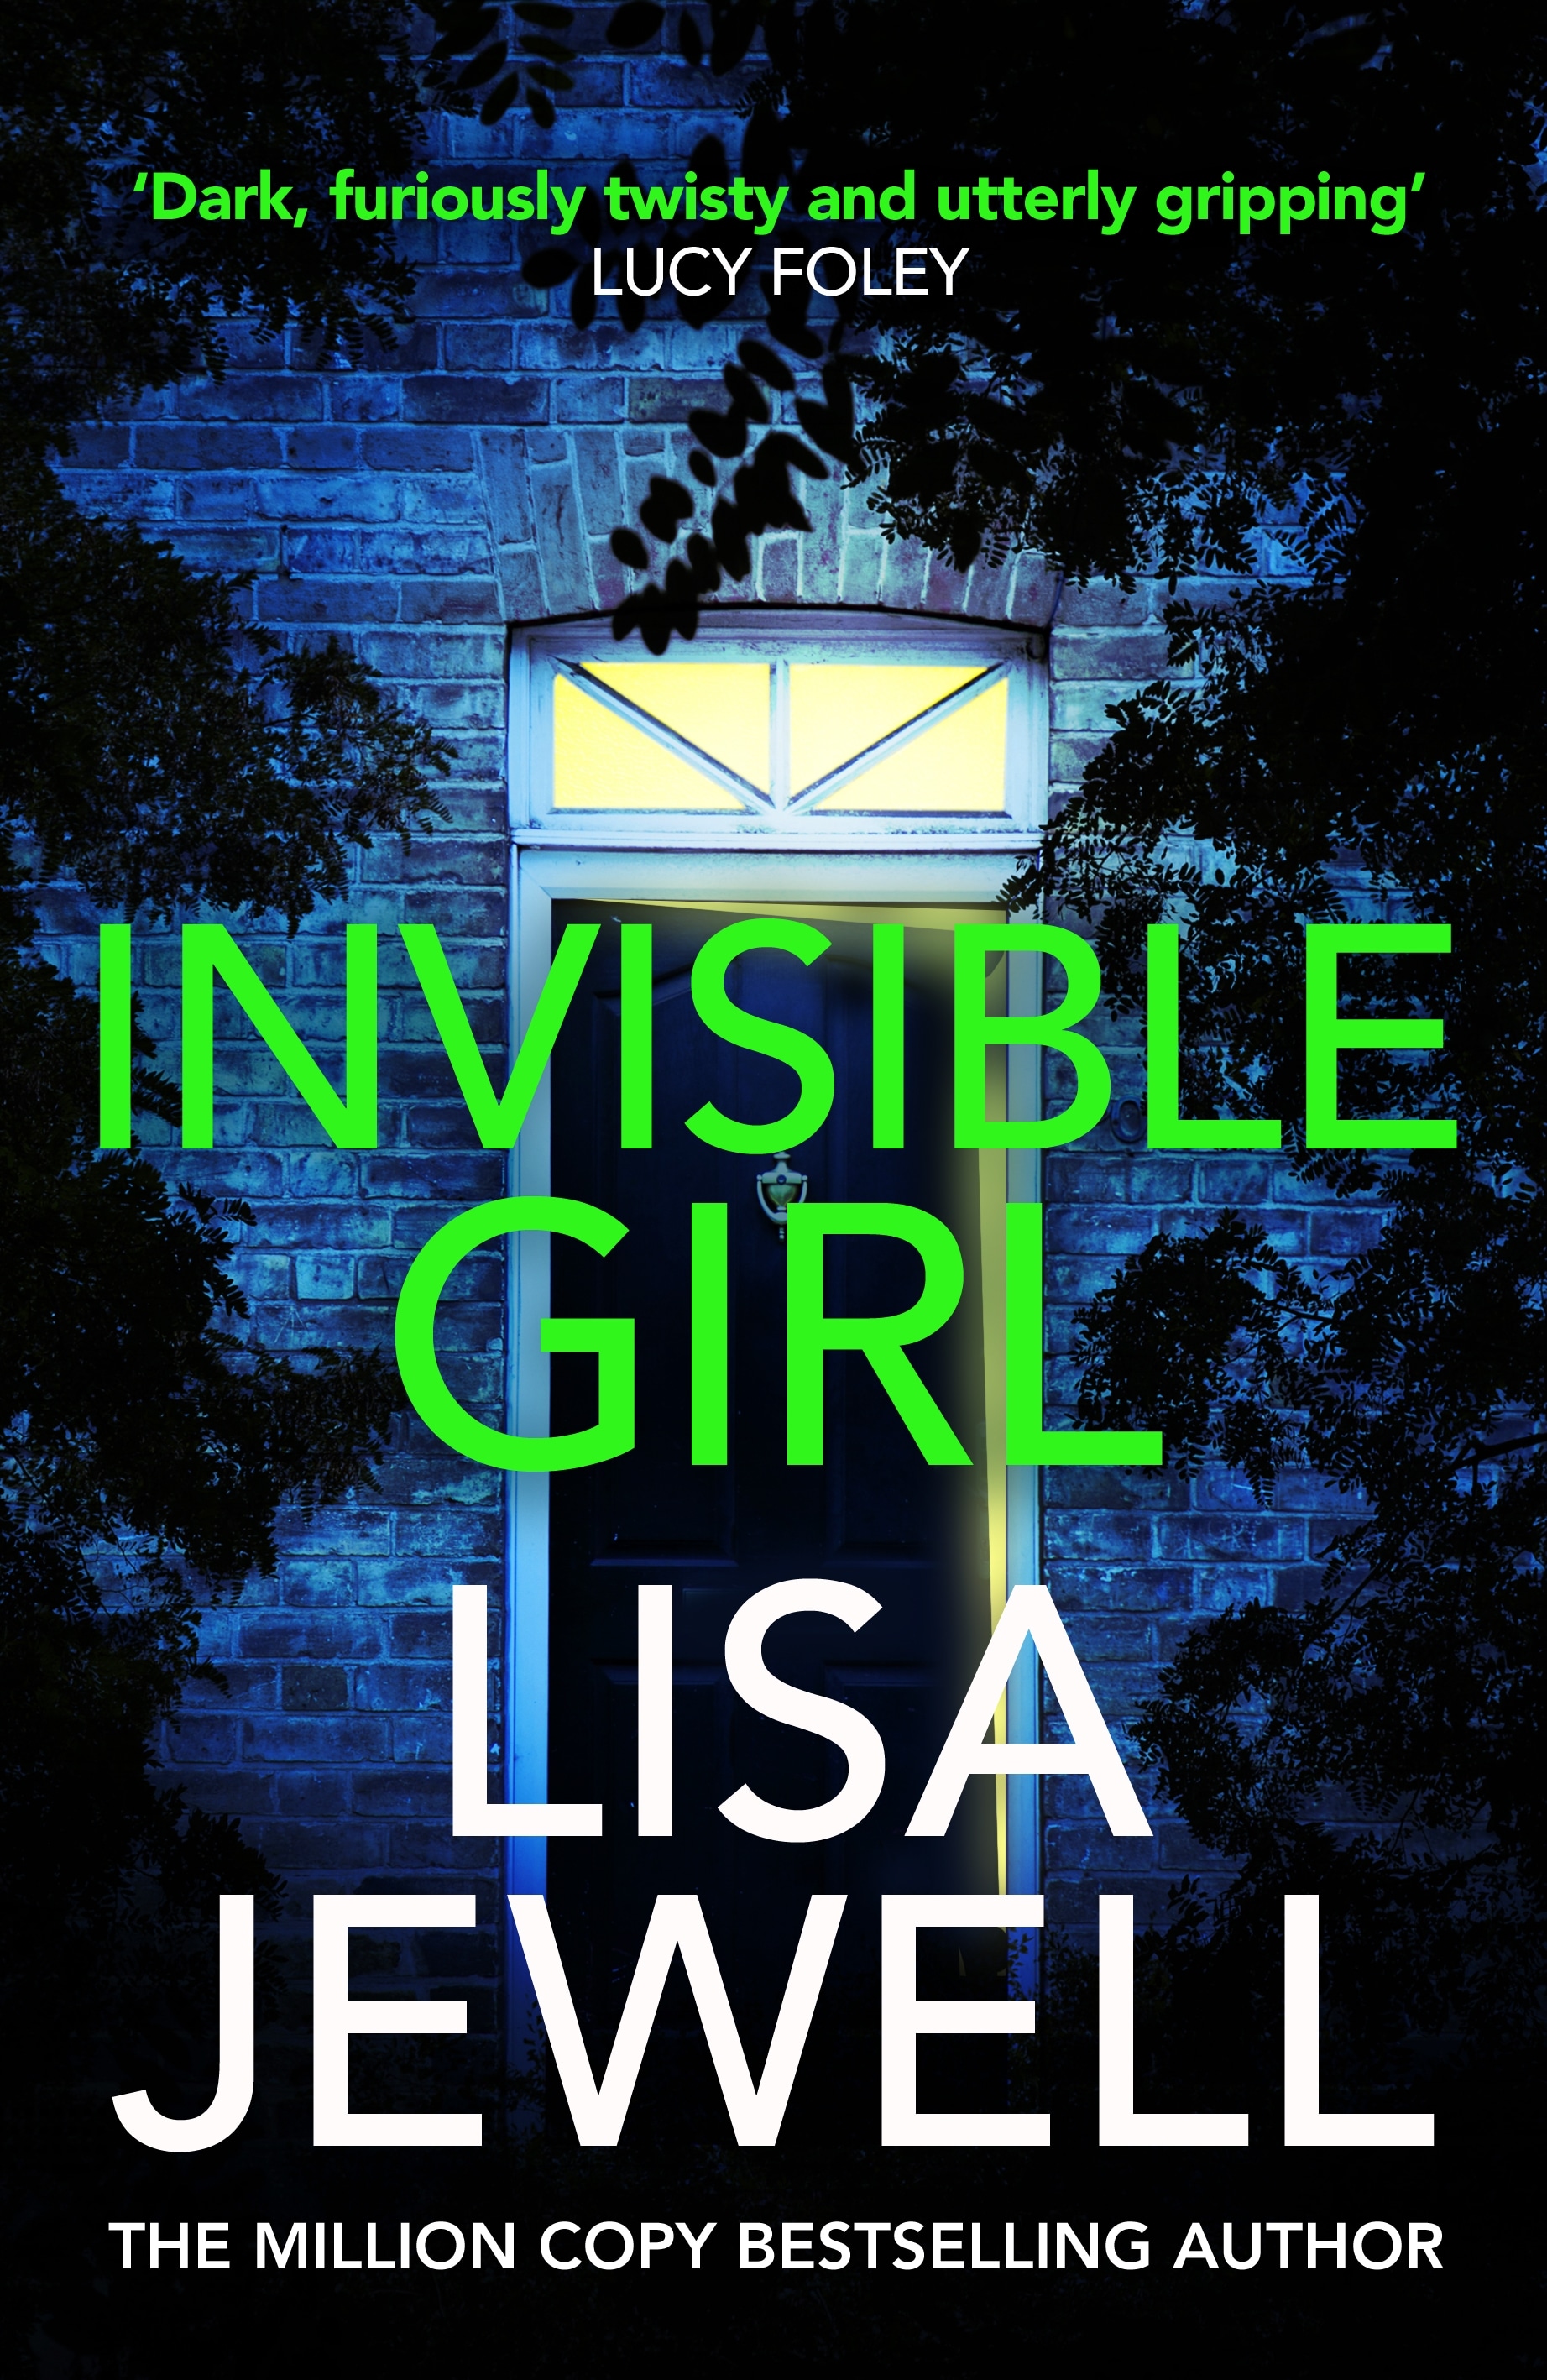 Book “Invisible Girl” by Lisa Jewell — January 7, 2021